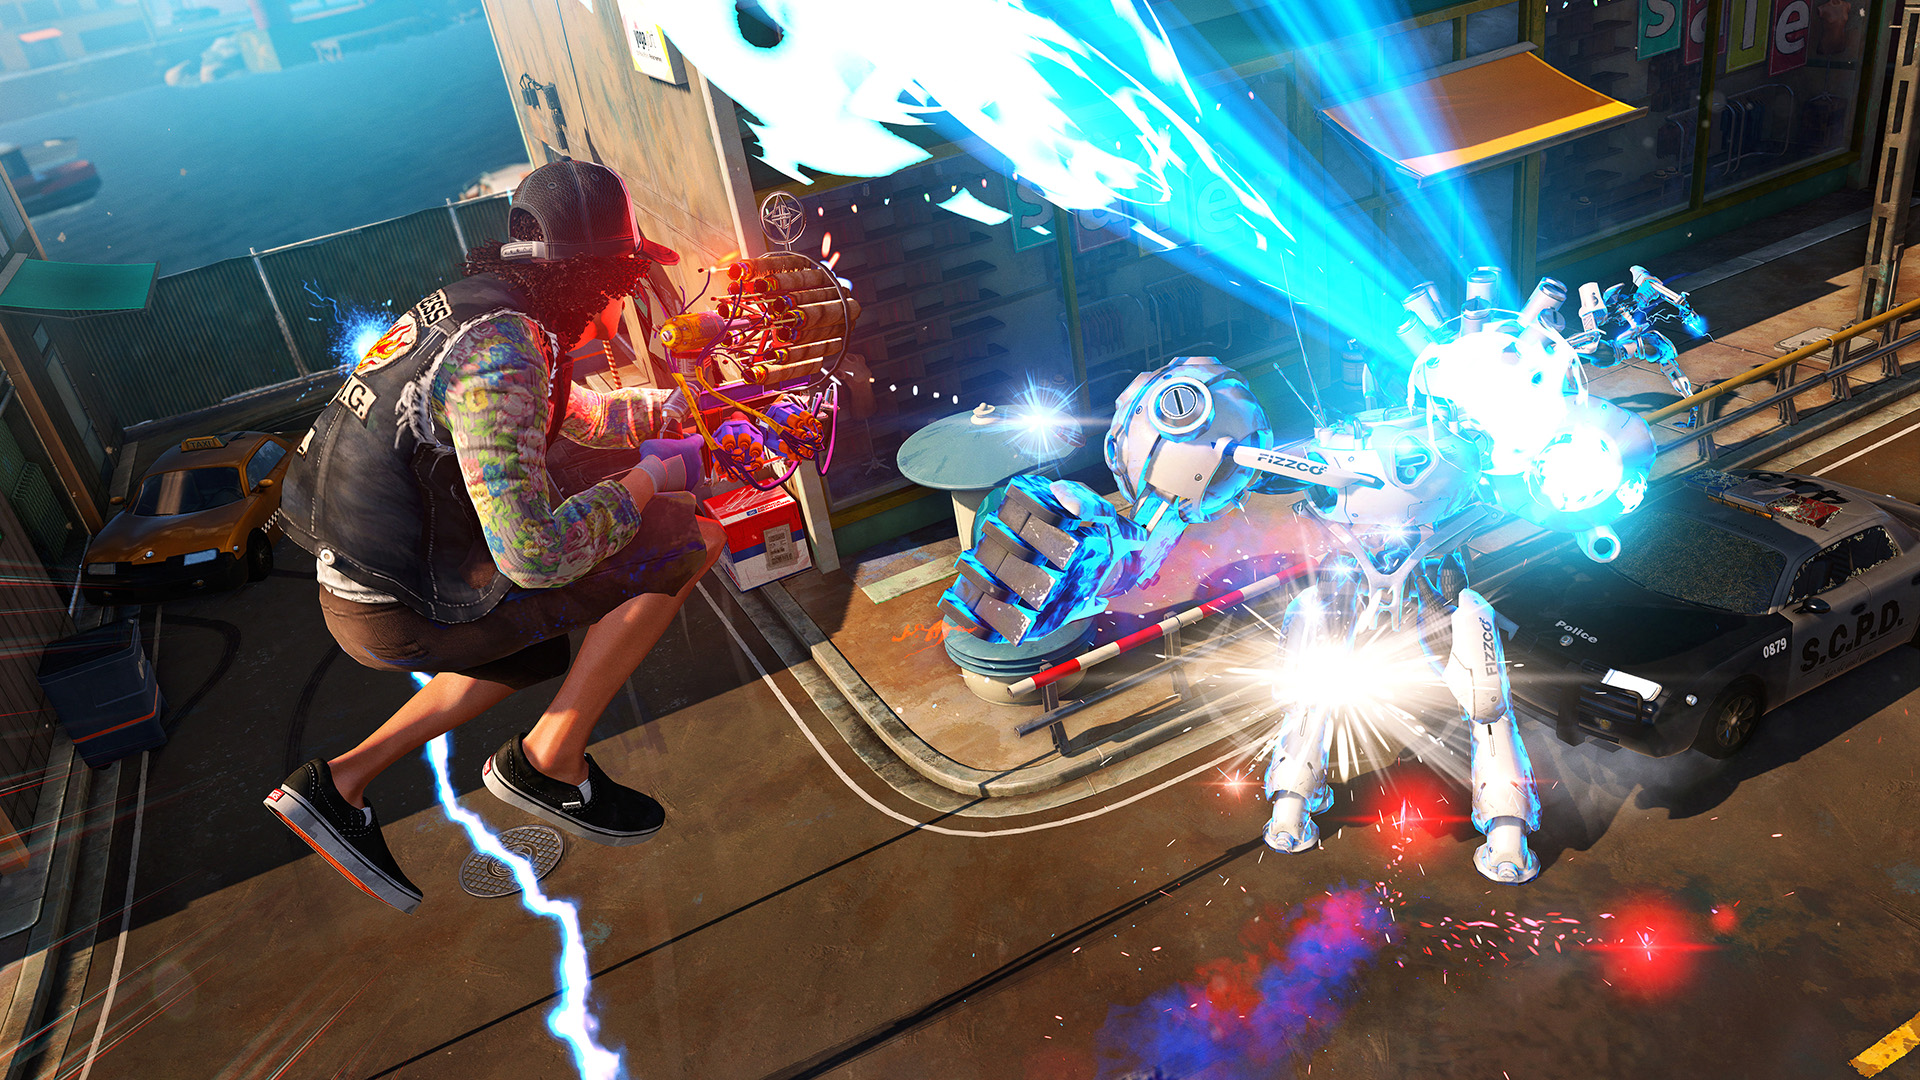 Review: Sunset Overdrive